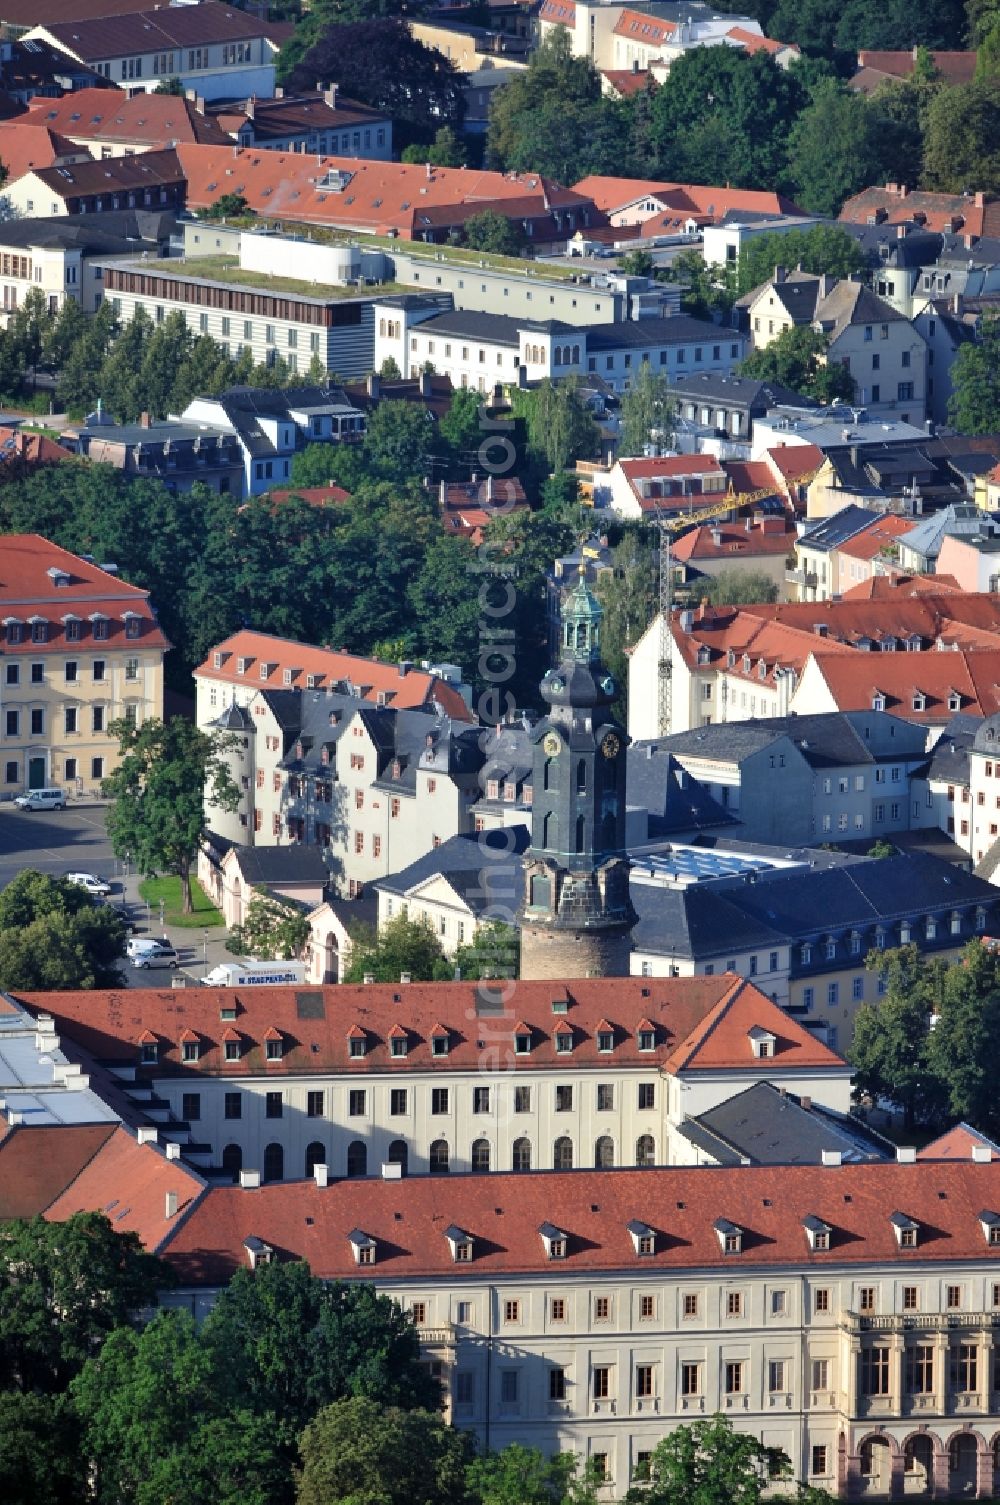 Aerial image Weimar - View of castle museum Weimar in Thuringia